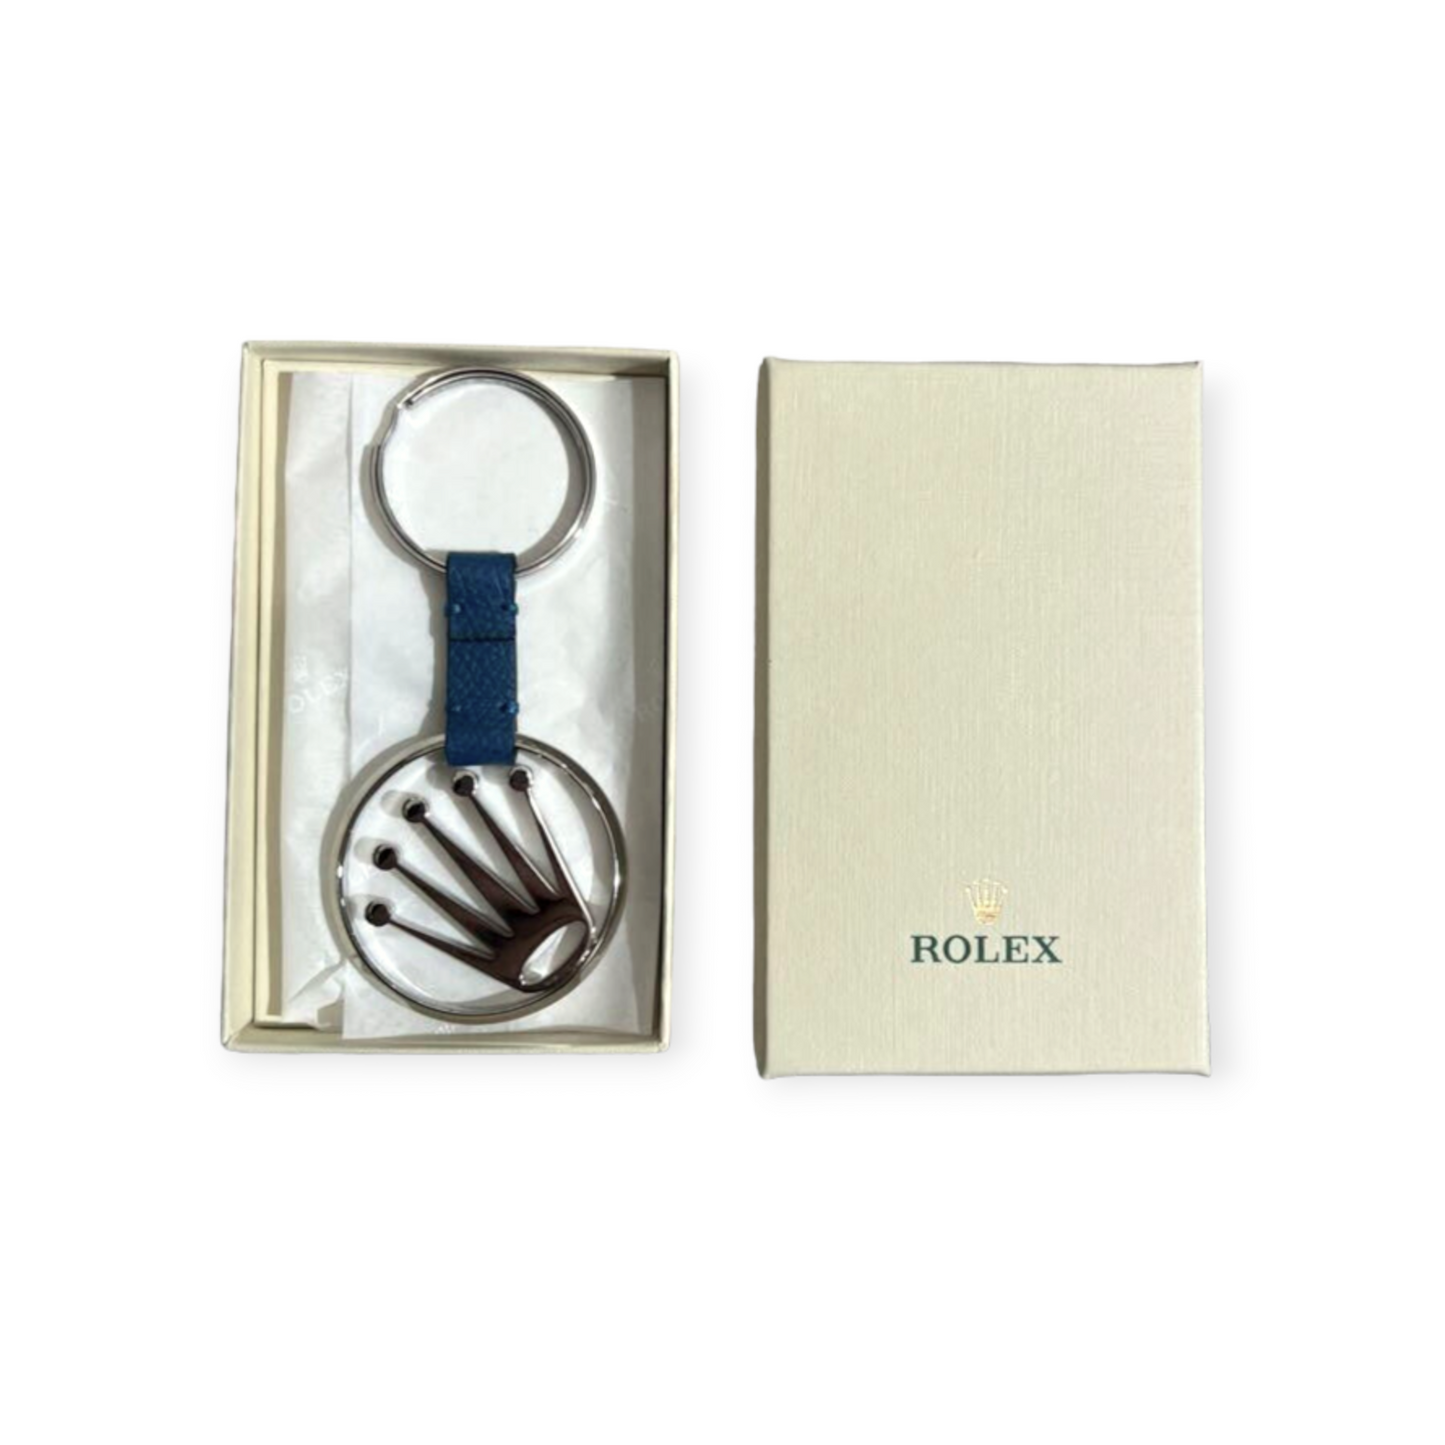 Rolex Oversized Crown Blue Key Ring Holder in its original box New